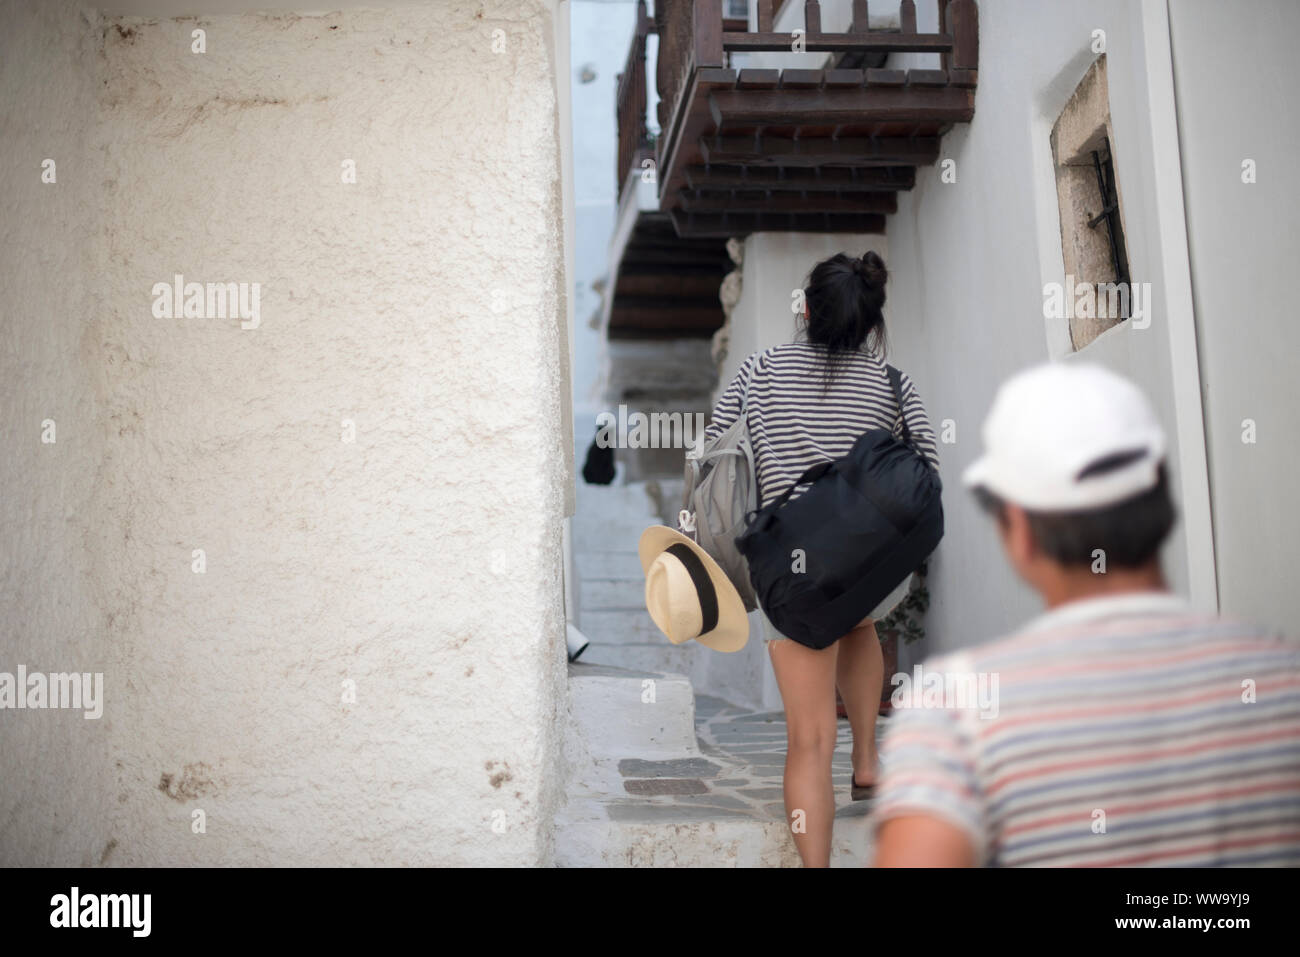 Naxo, Greece - June 26, 2018: Visitors to the island of Naxos wander along the tight stairways of the old town. Stock Photo